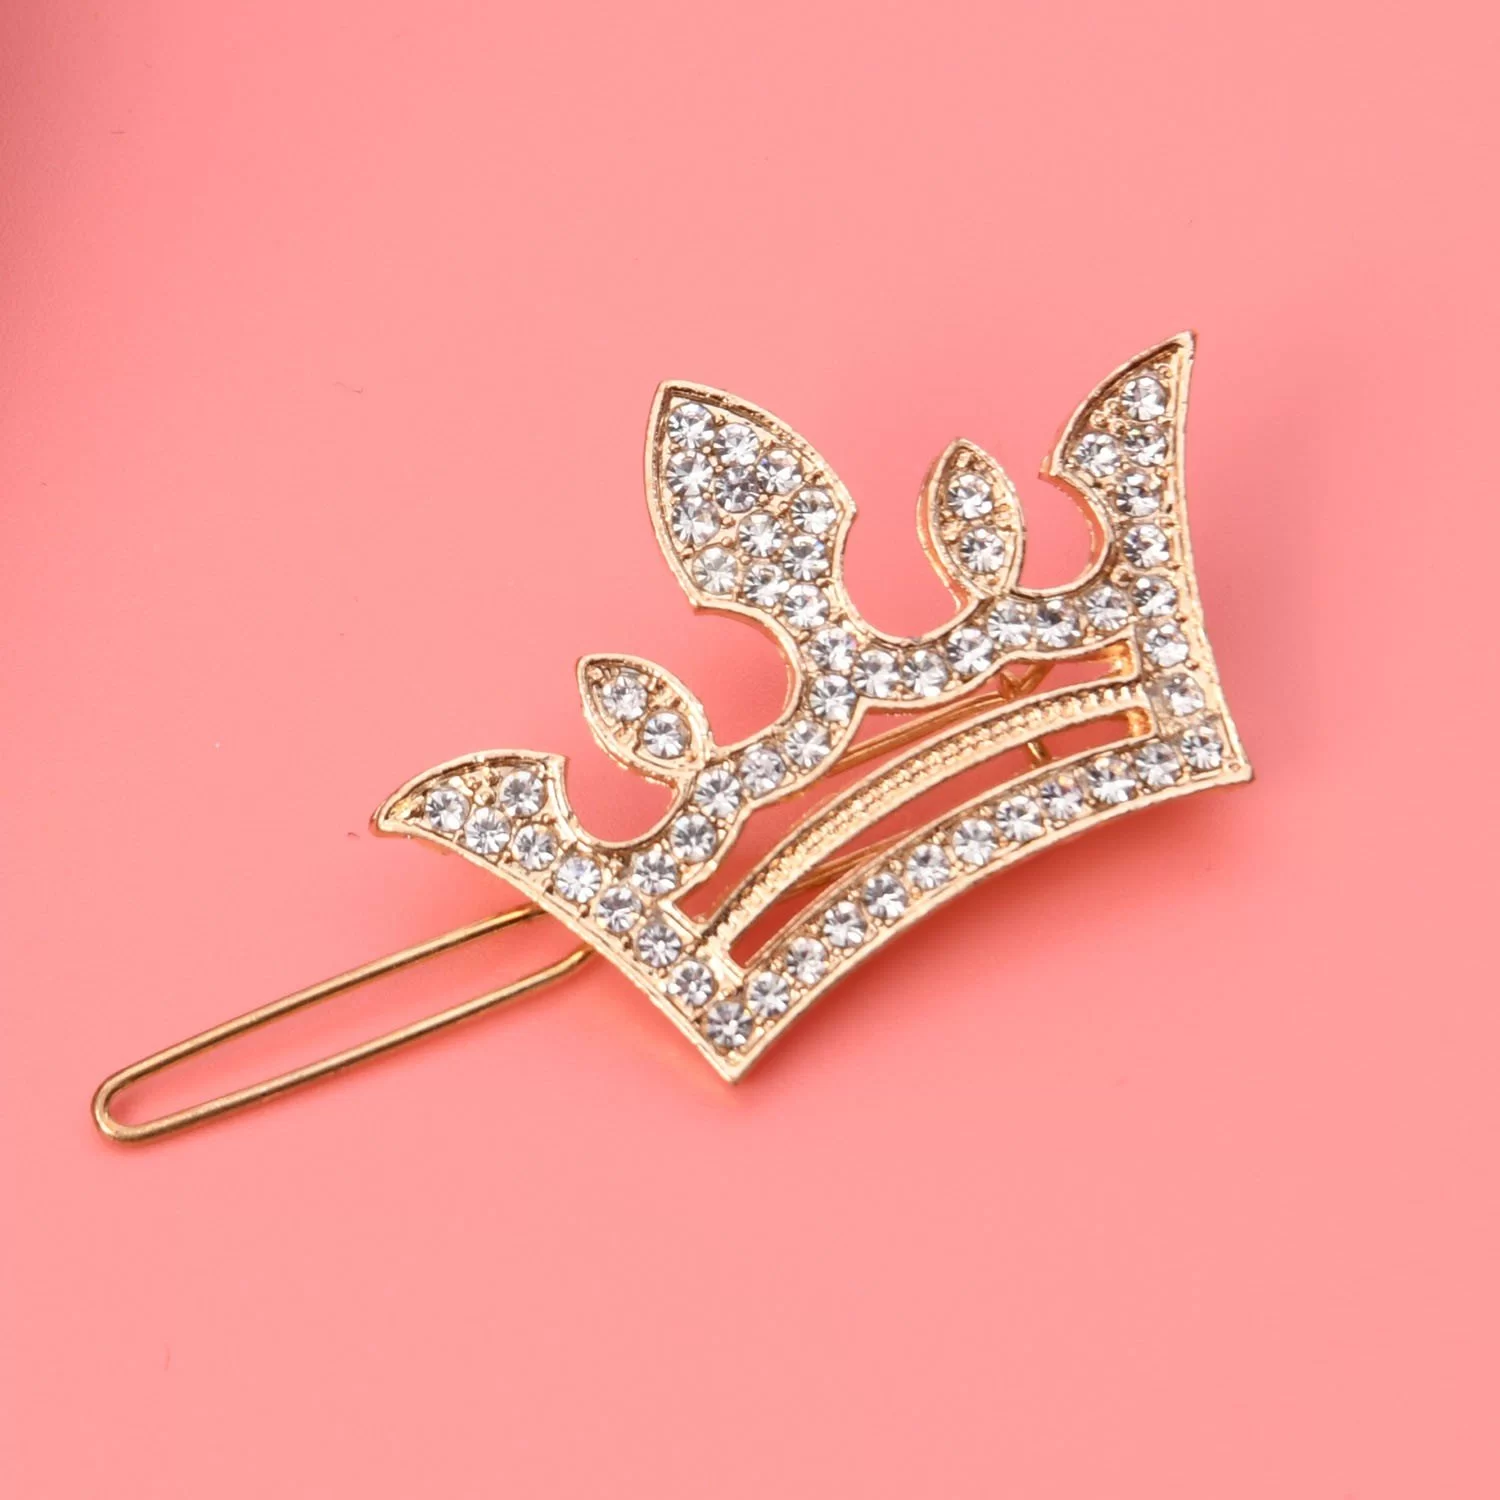 Hair Clip Crown Rhinstone Metal Gold Silver Color Design Daily Fashion  Beauty Use Hair Clip For Girl And Women Length 5cm